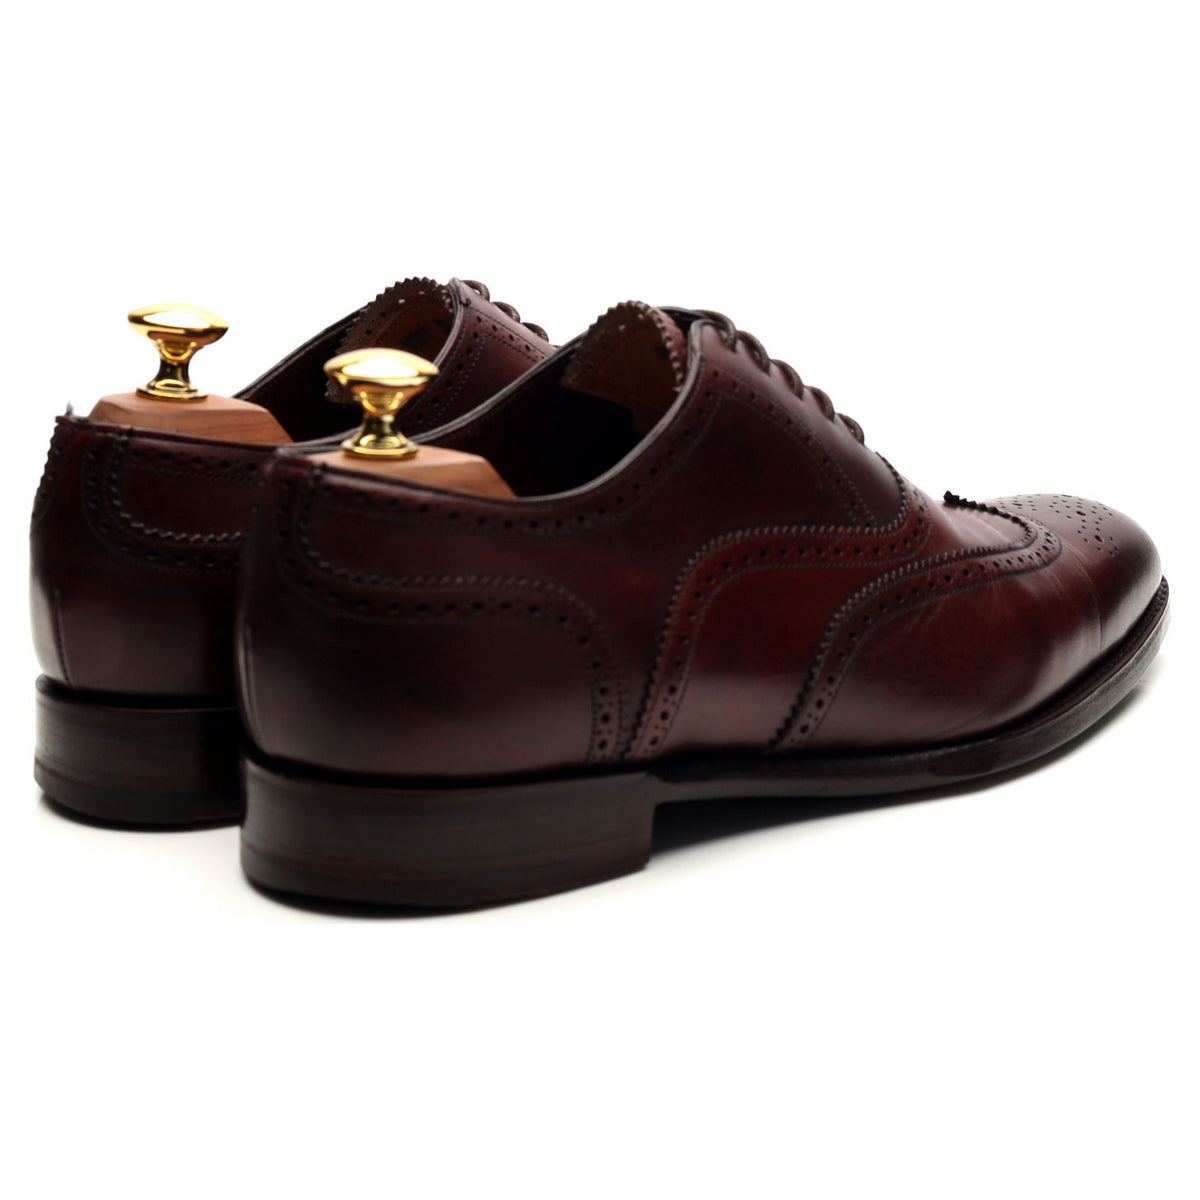 Imperial &#39;Ashburton&#39; Burgundy Leather Oxford Brogues UK 6.5 G